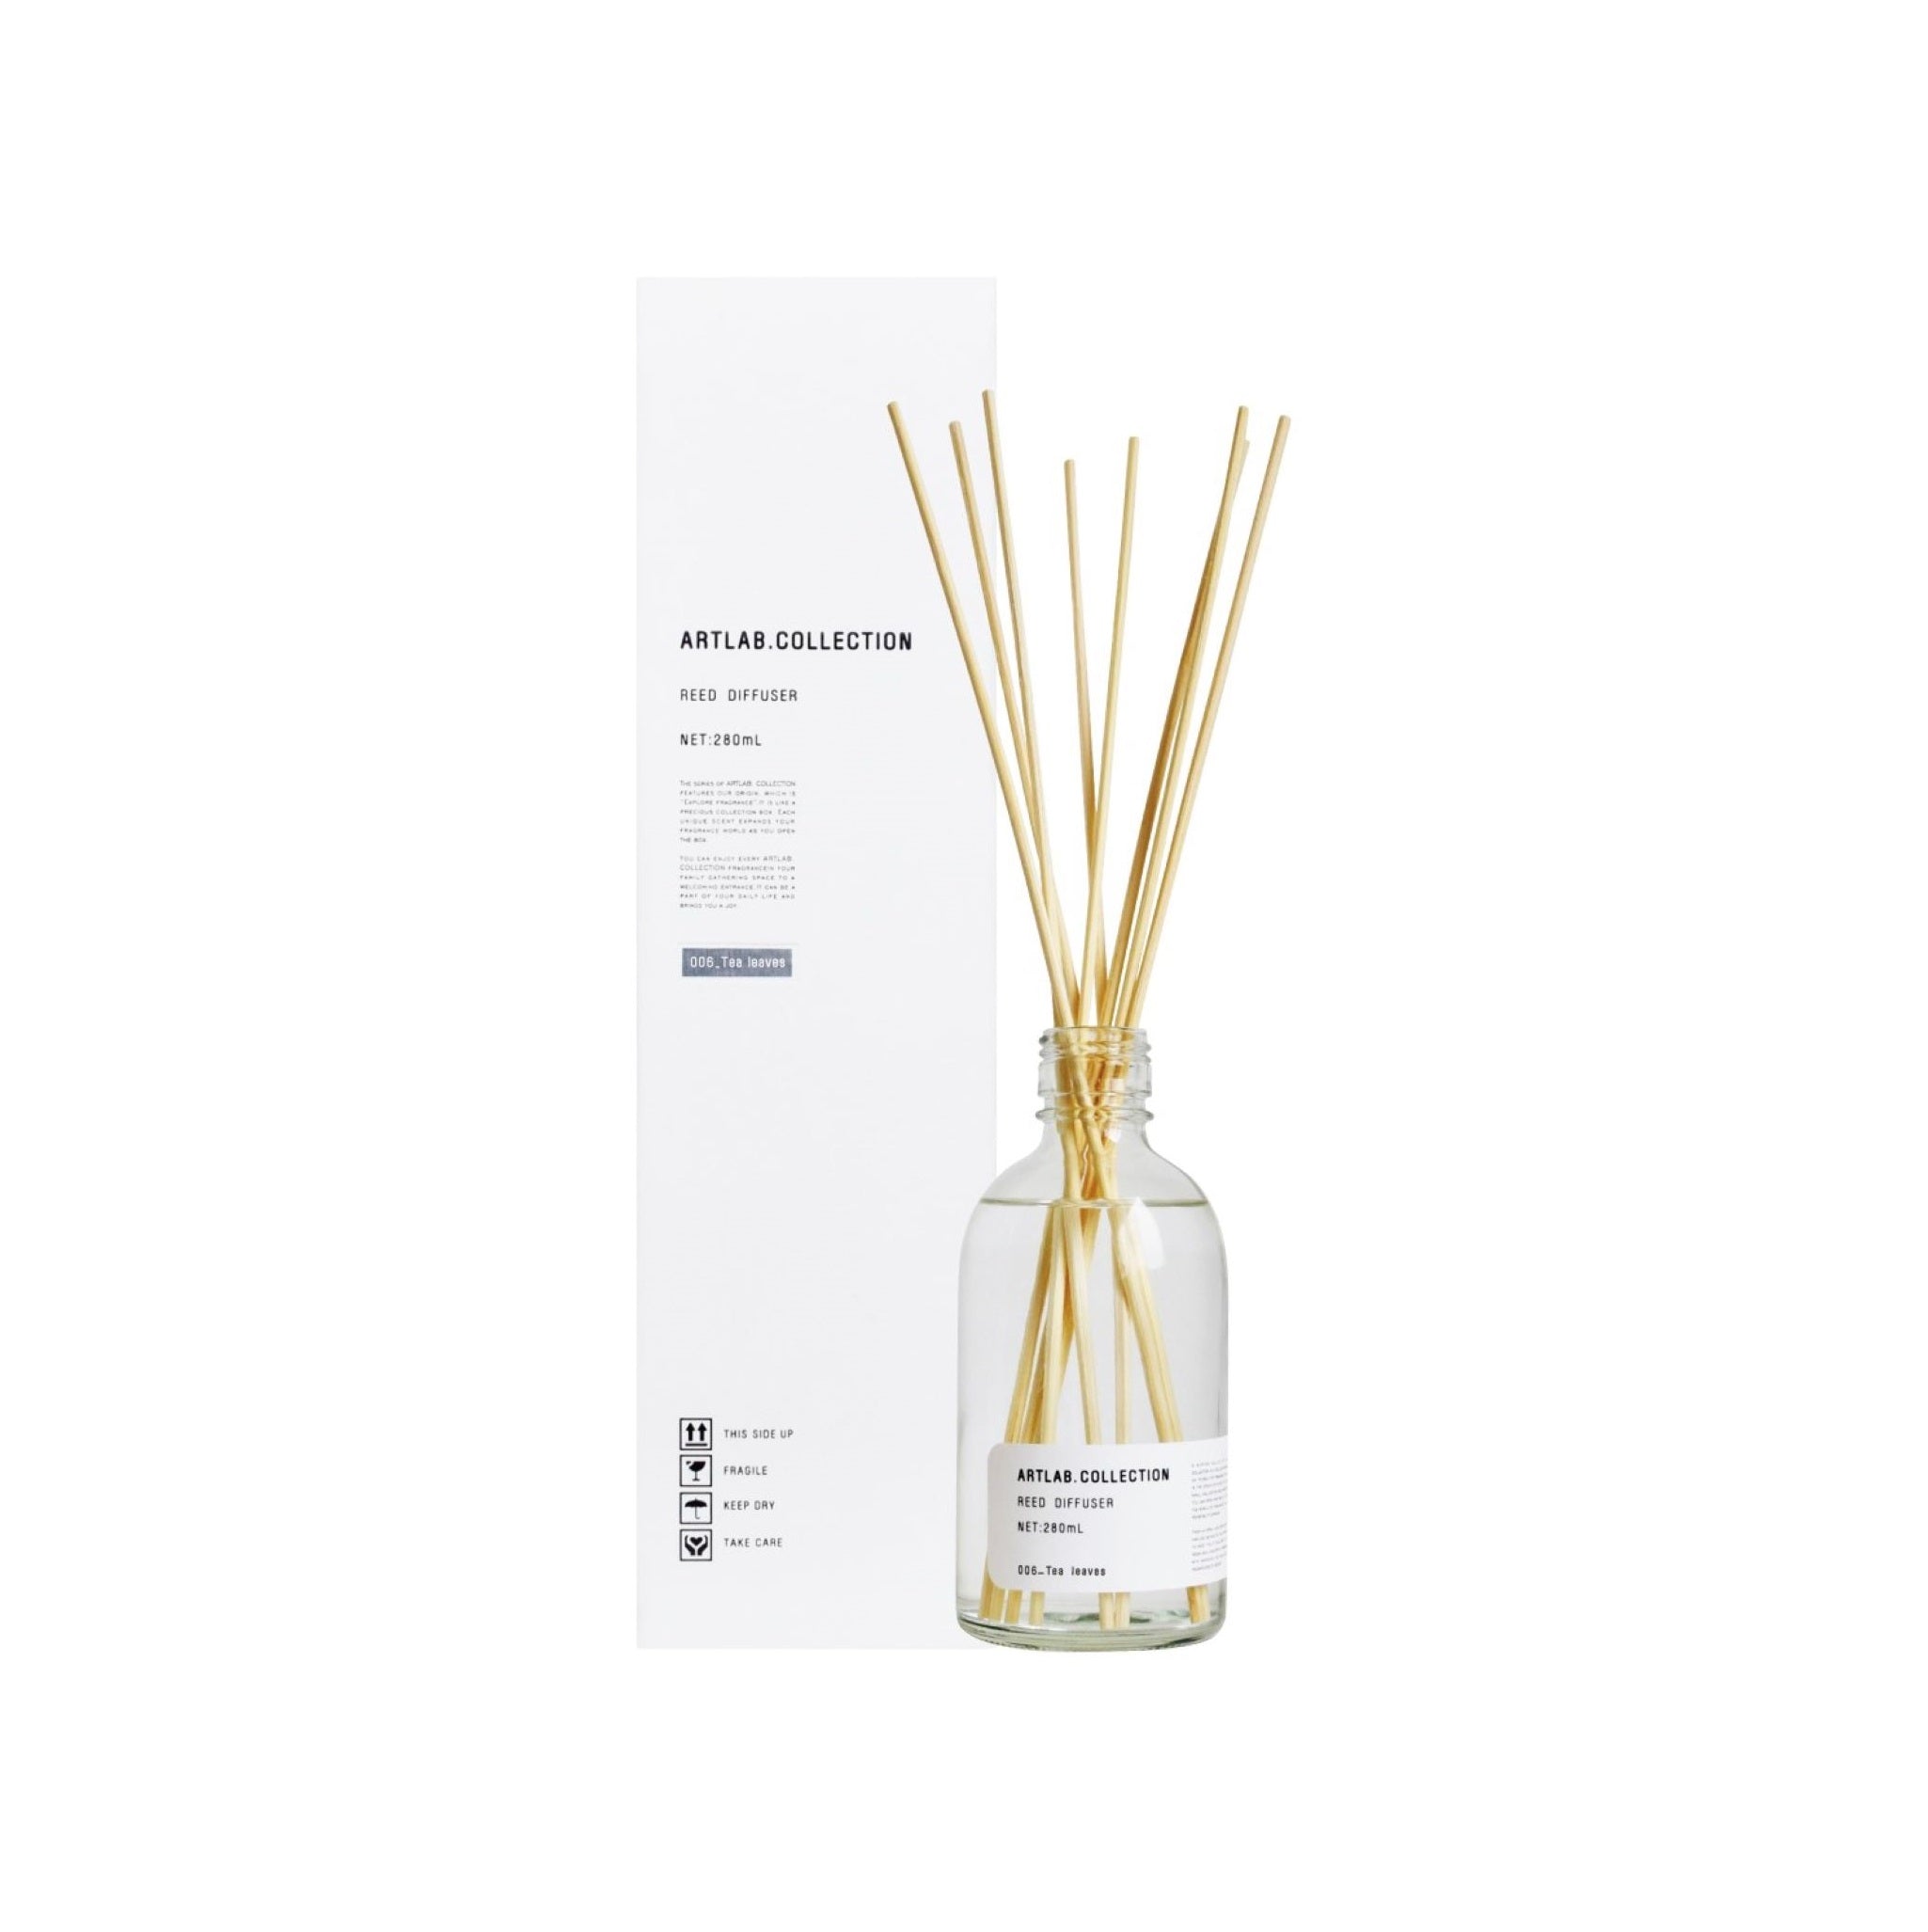 ARTLAB.COLLECTION REED DIFFUSER